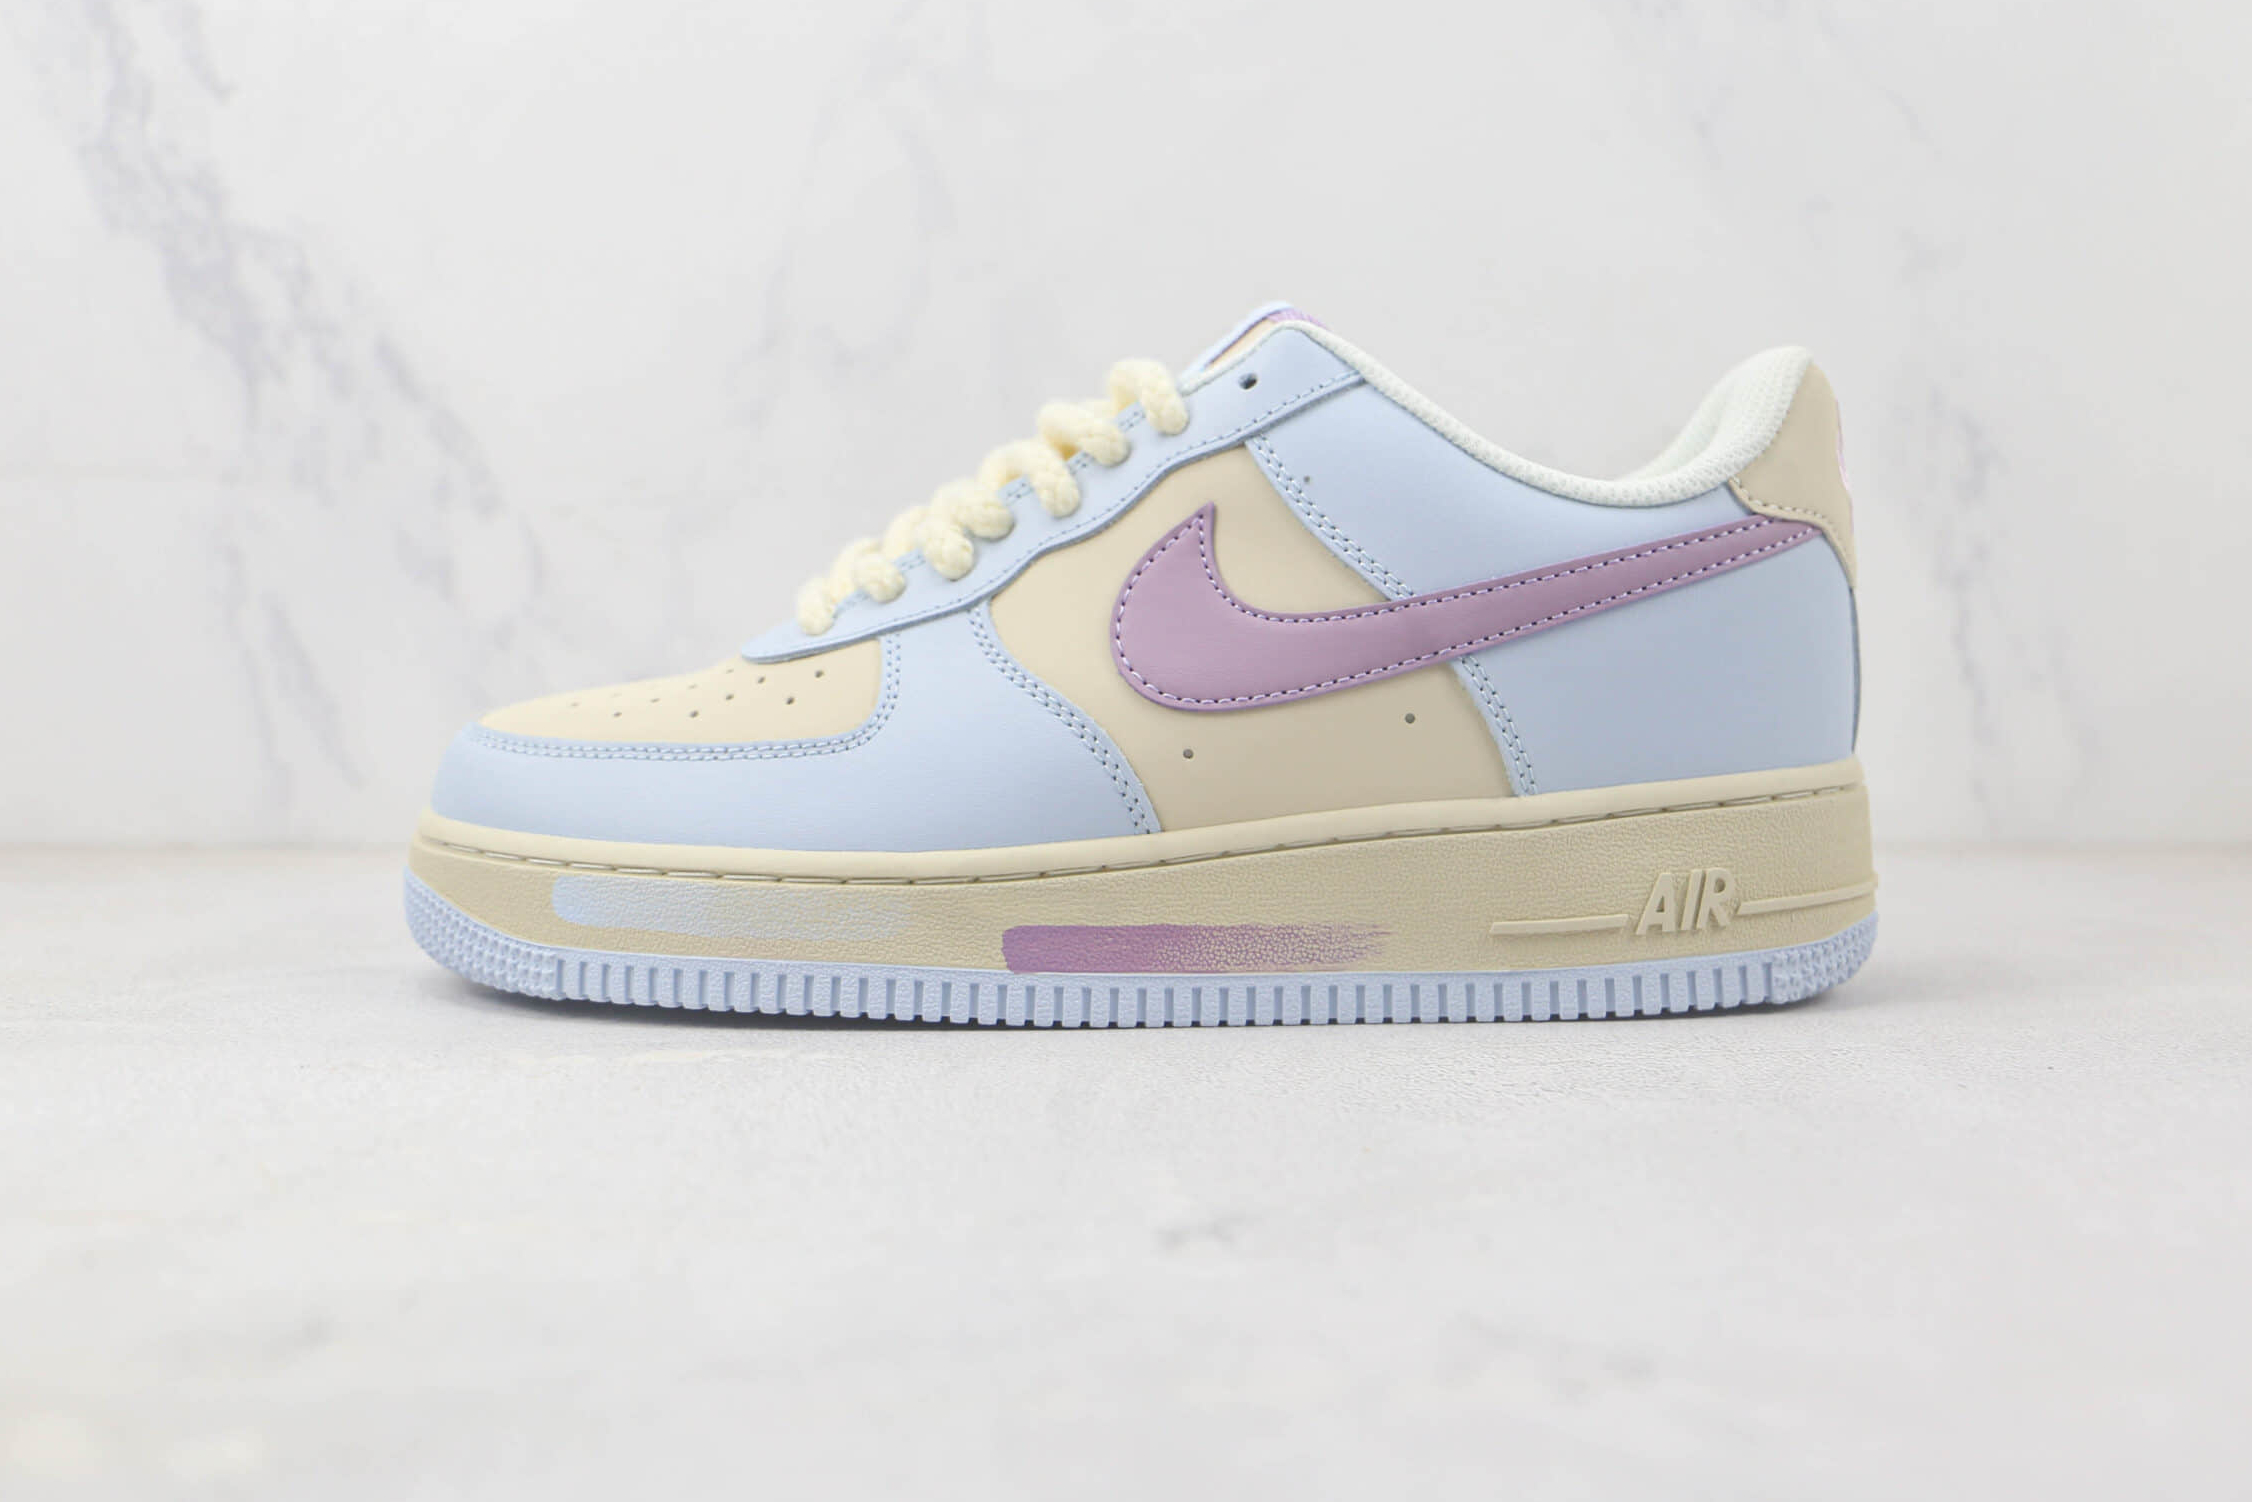 Nike Air Force 1 07 Low Jade Hare Blue Purple Grey CW0088-111 - Limited Edition Sneaker for Ultimate Style and Comfort